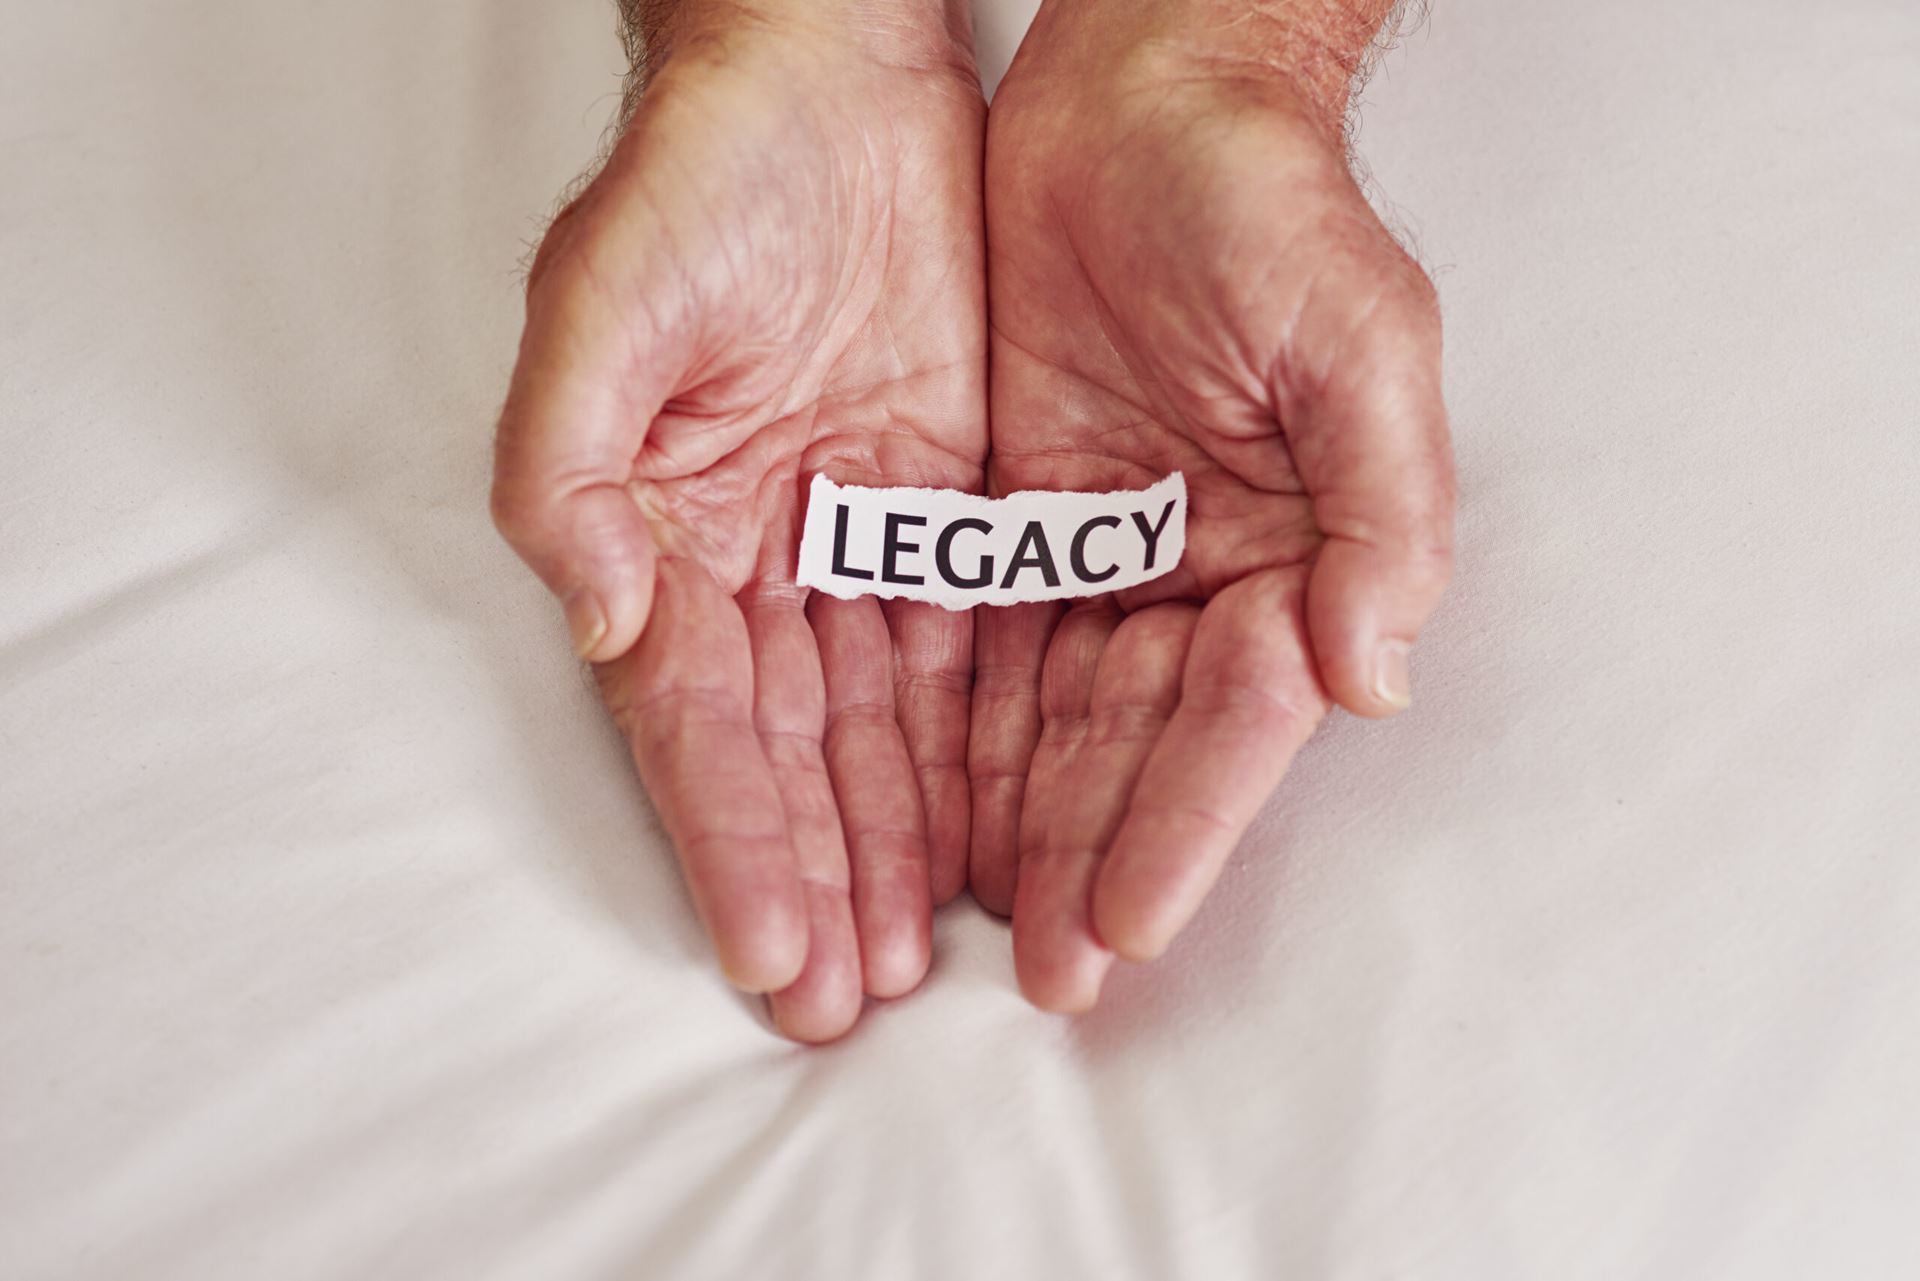 Open hands with the word "Legacy" on them